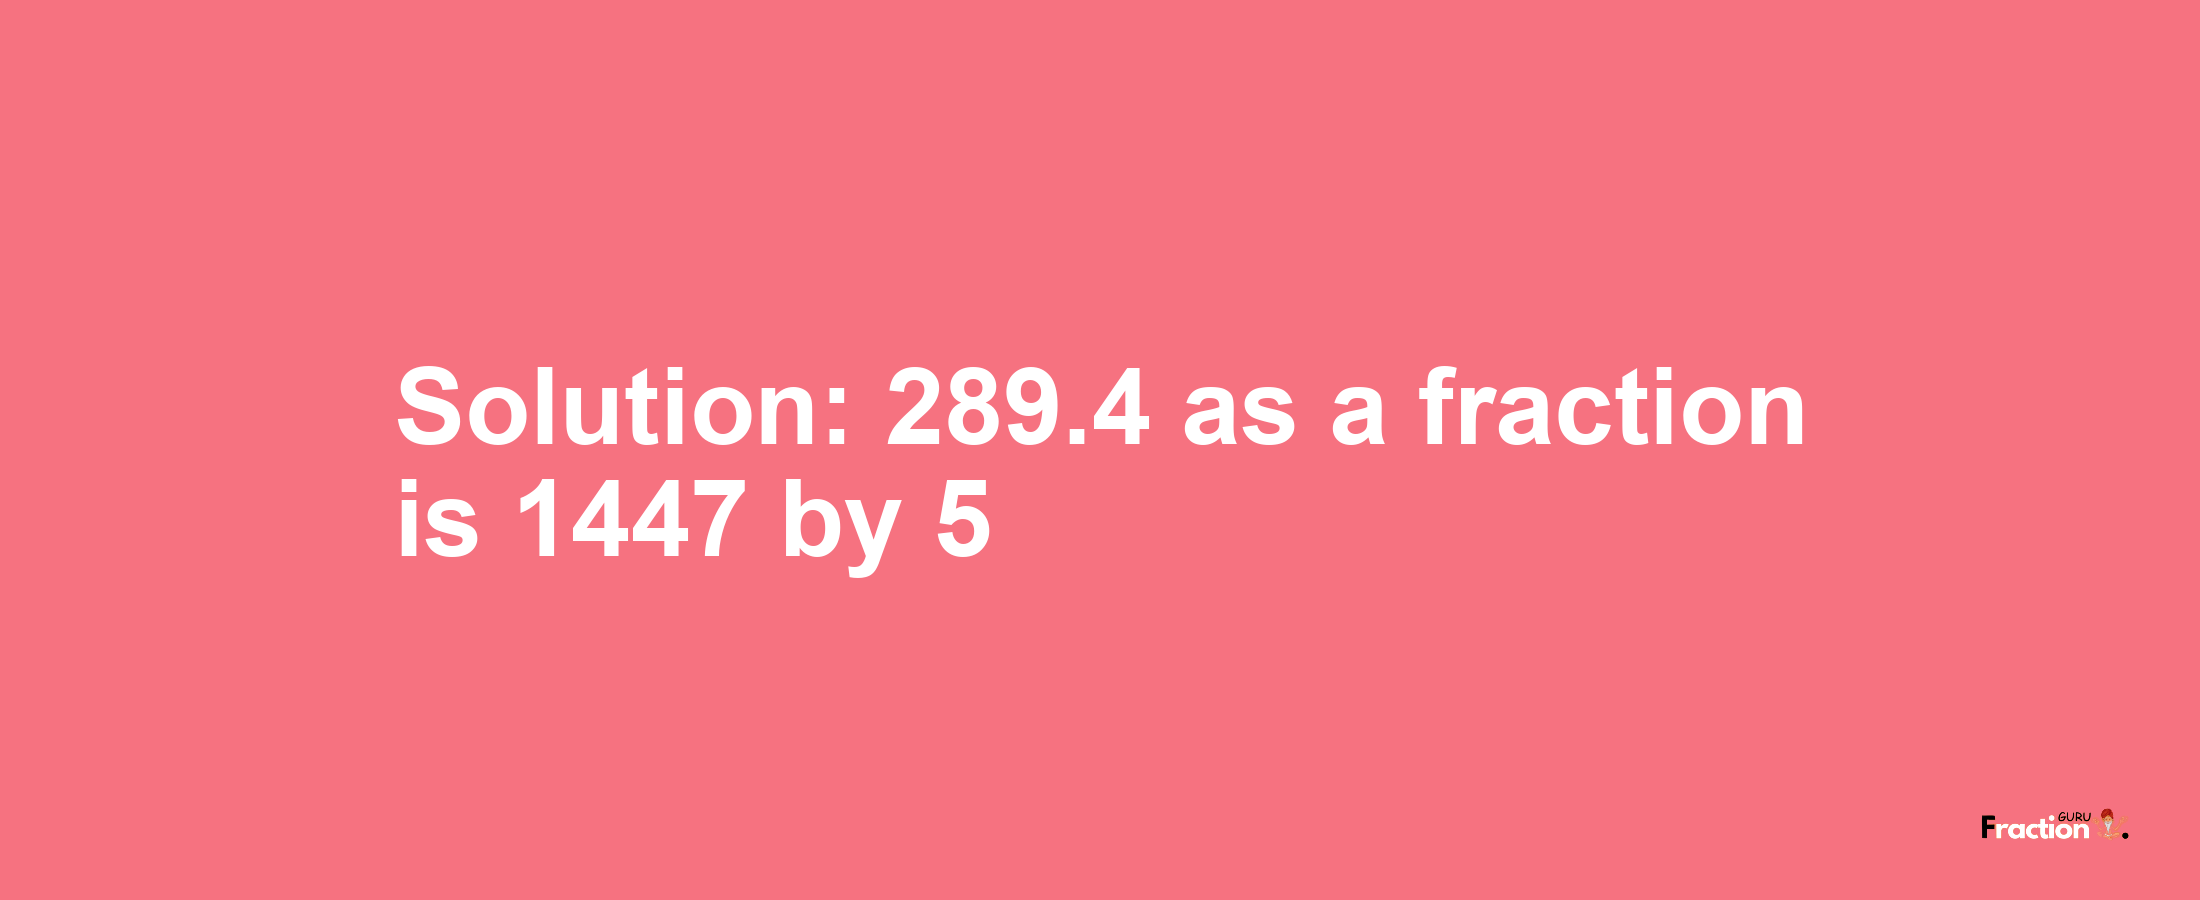 Solution:289.4 as a fraction is 1447/5